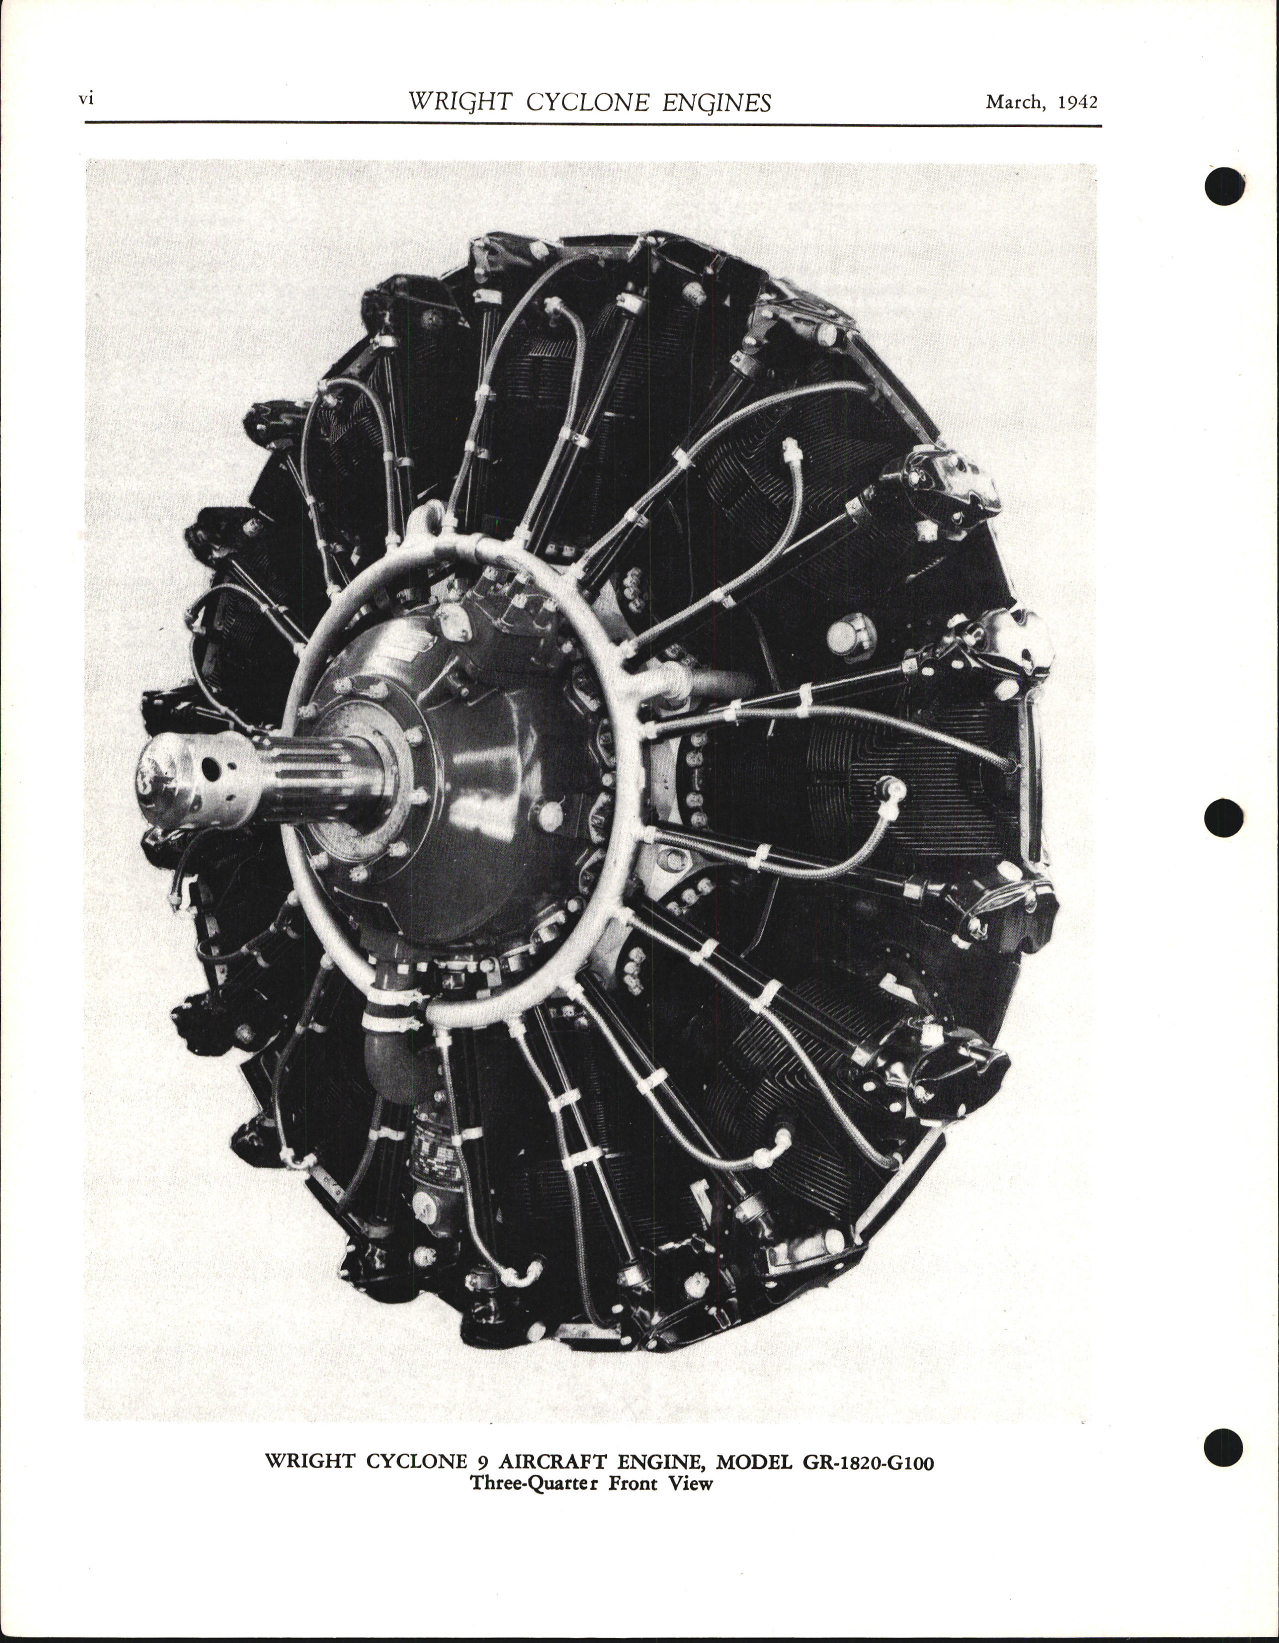 Sample page 6 from AirCorps Library document: Install, Operation, and Maintenance for Cyclone 9 Models C9GA and C9GB